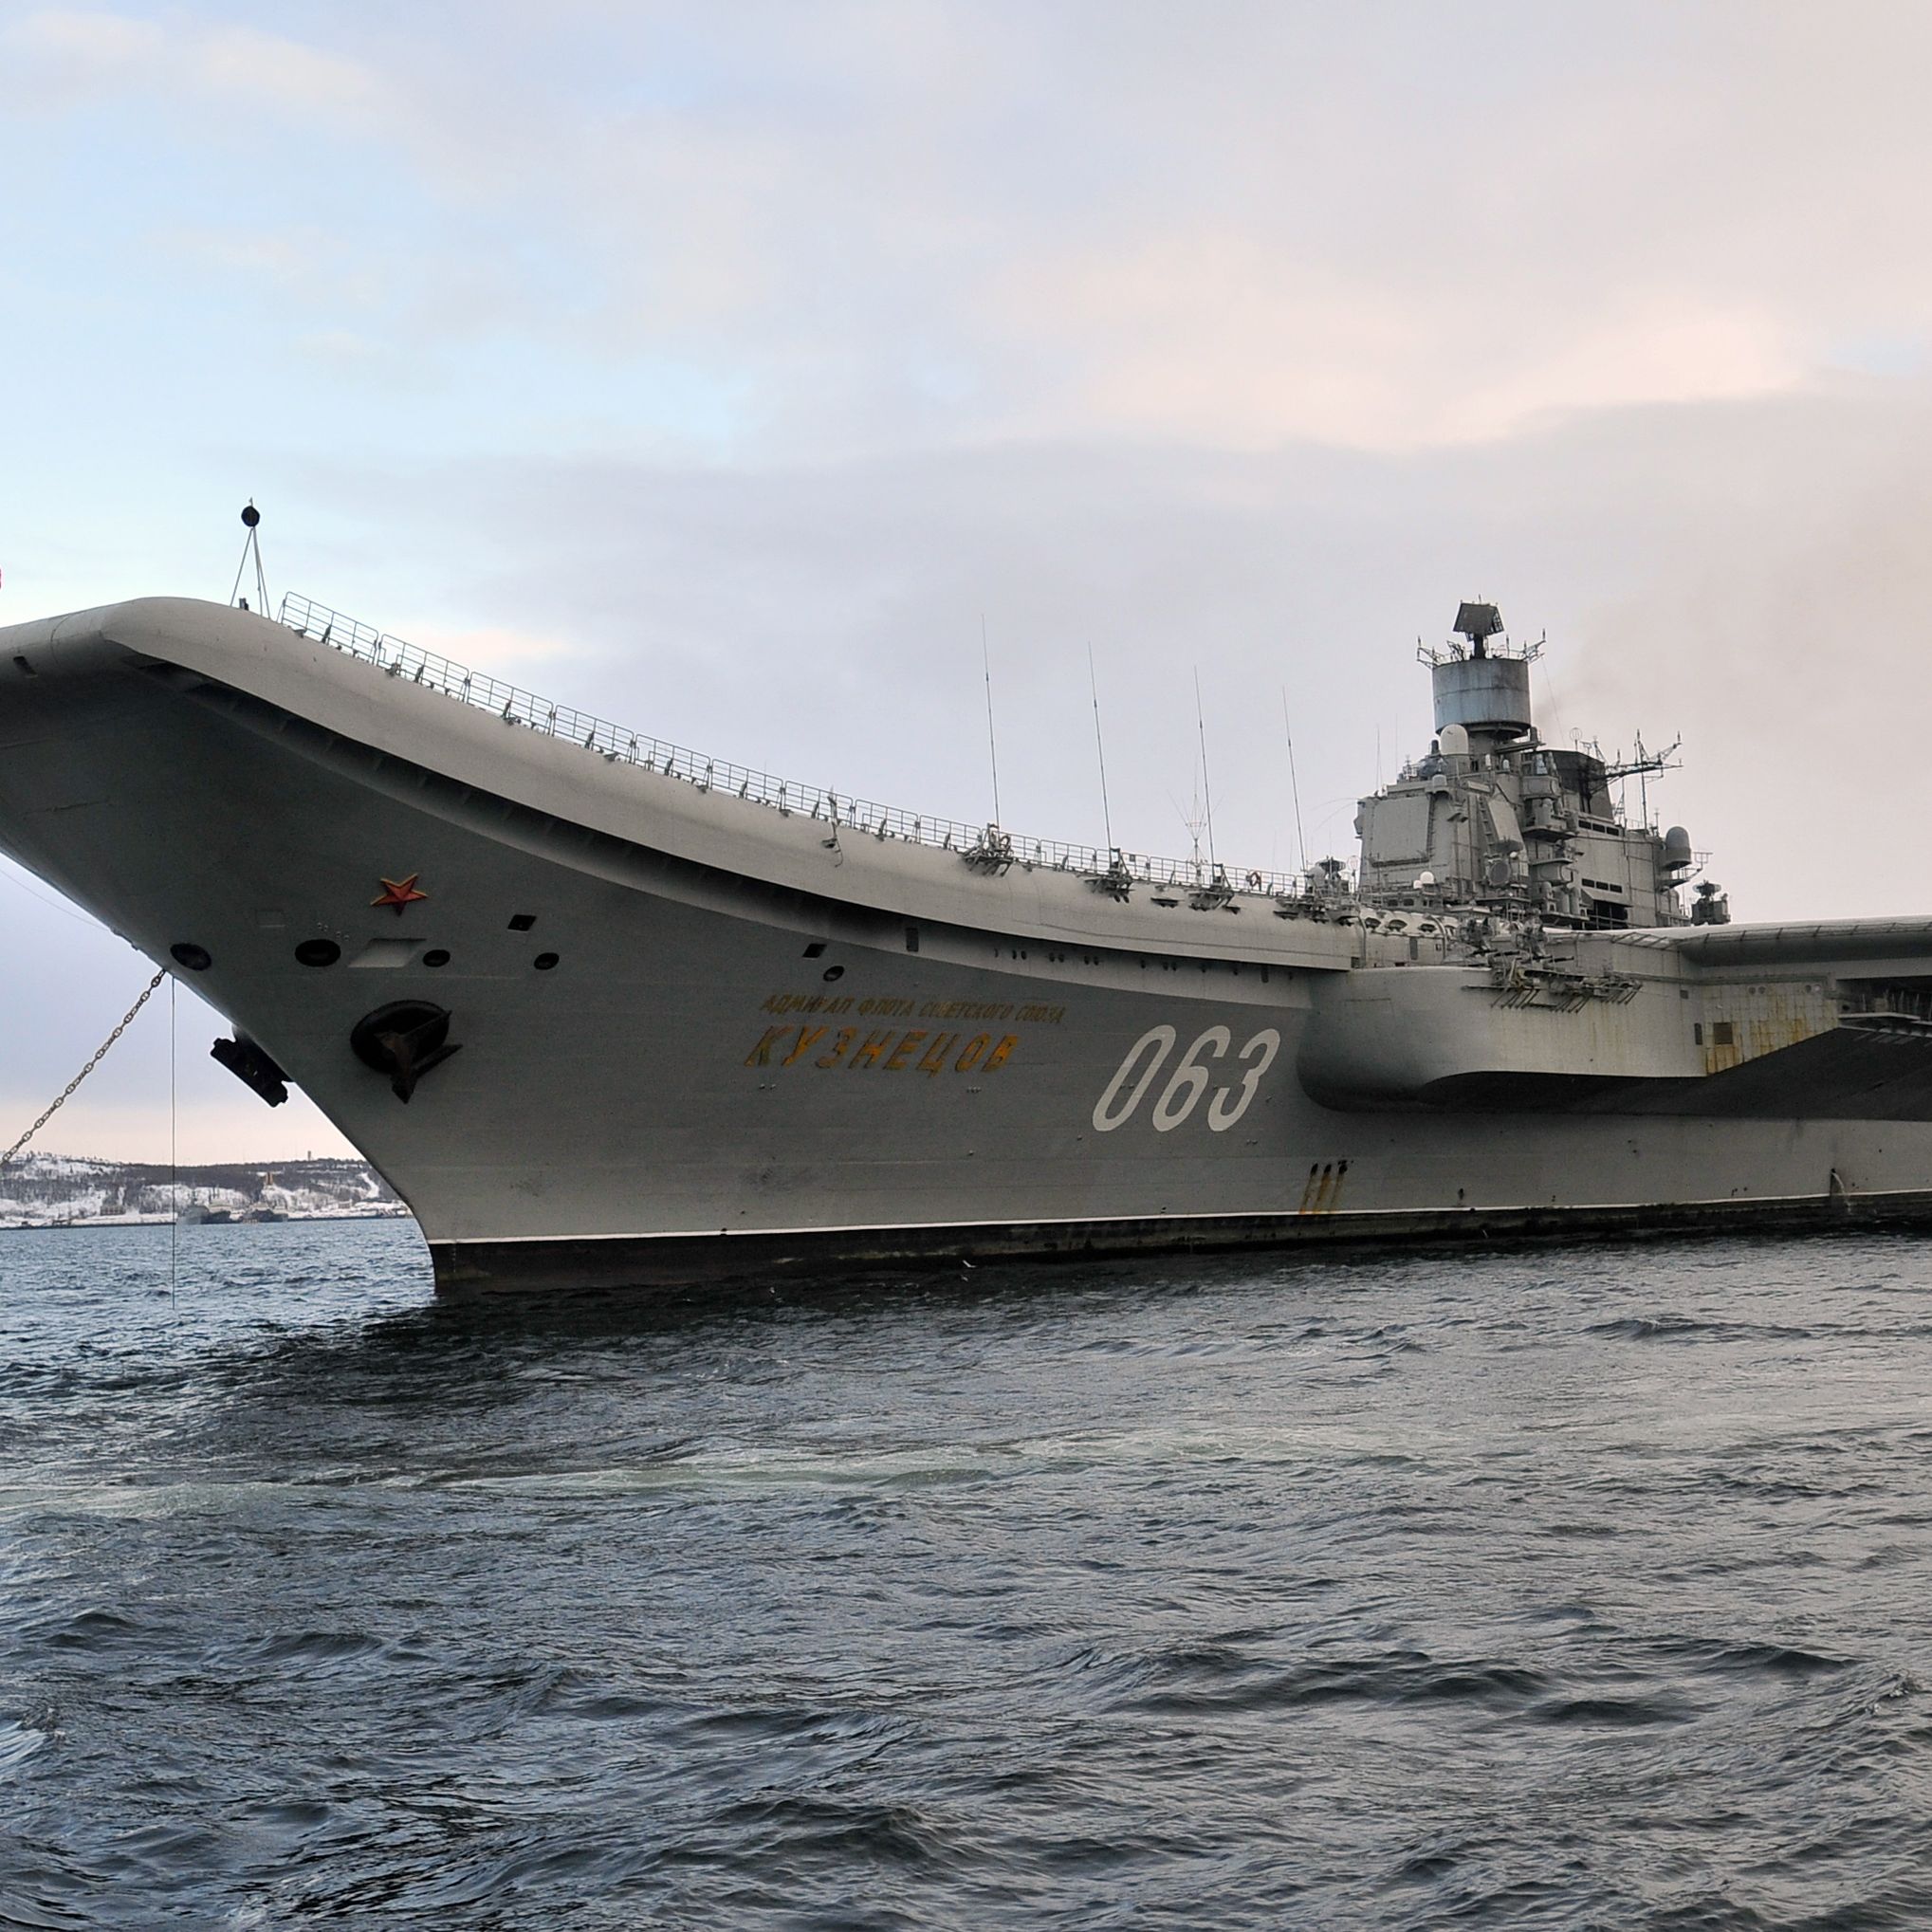 Russia's Cursed Carrier Is Coming Back to Sea. Maybe.